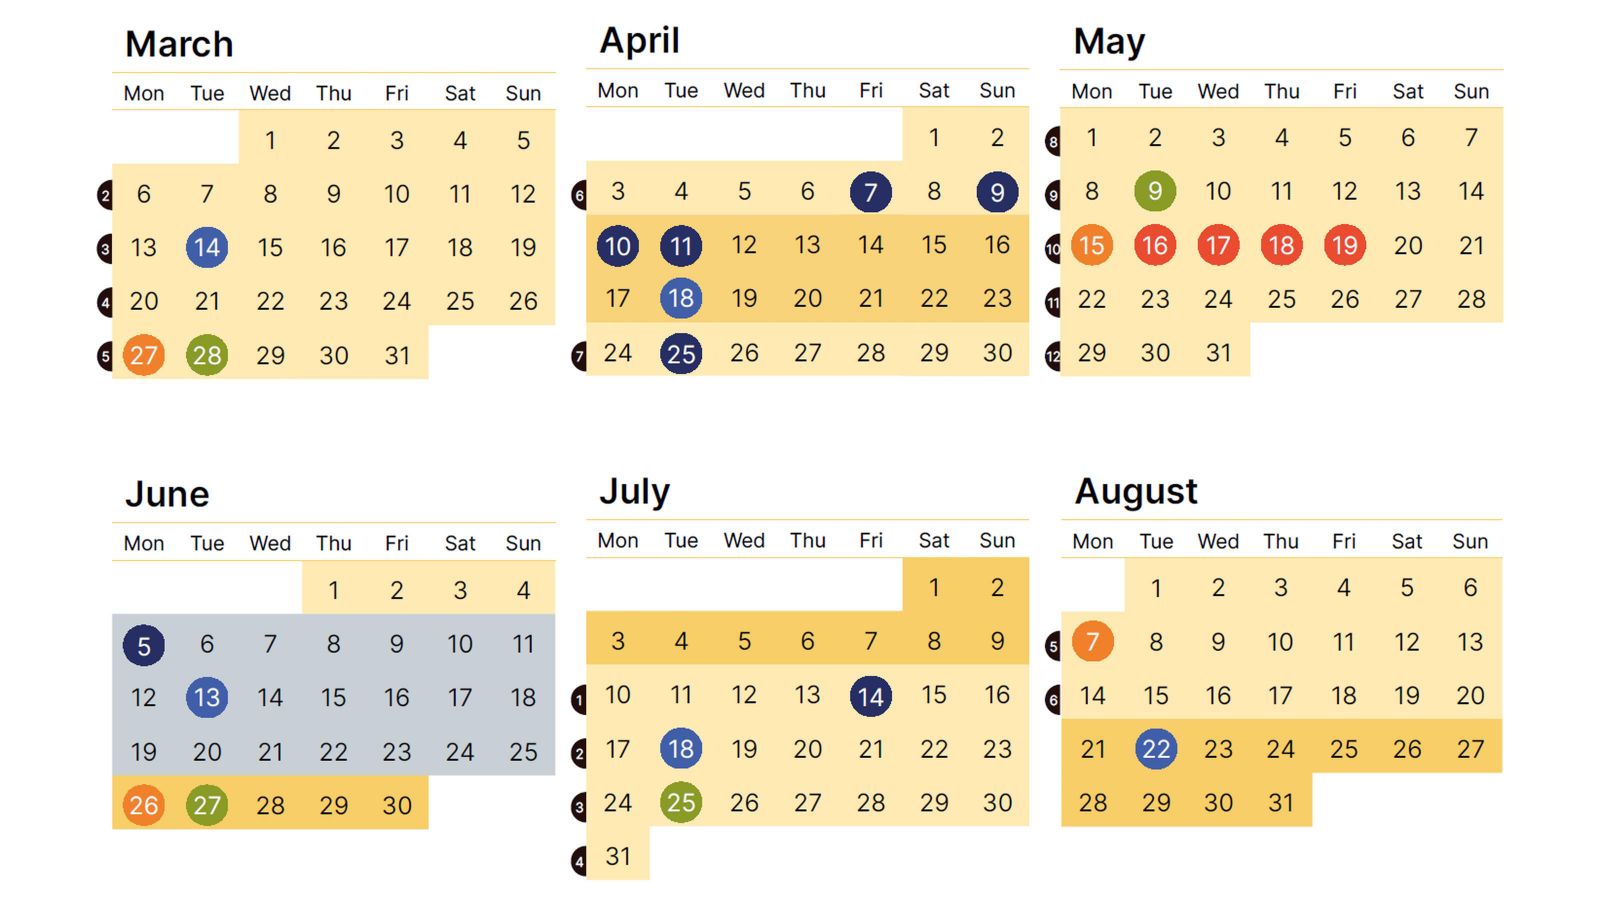 Section from the University's wall calendar showing trimester and exam dates.